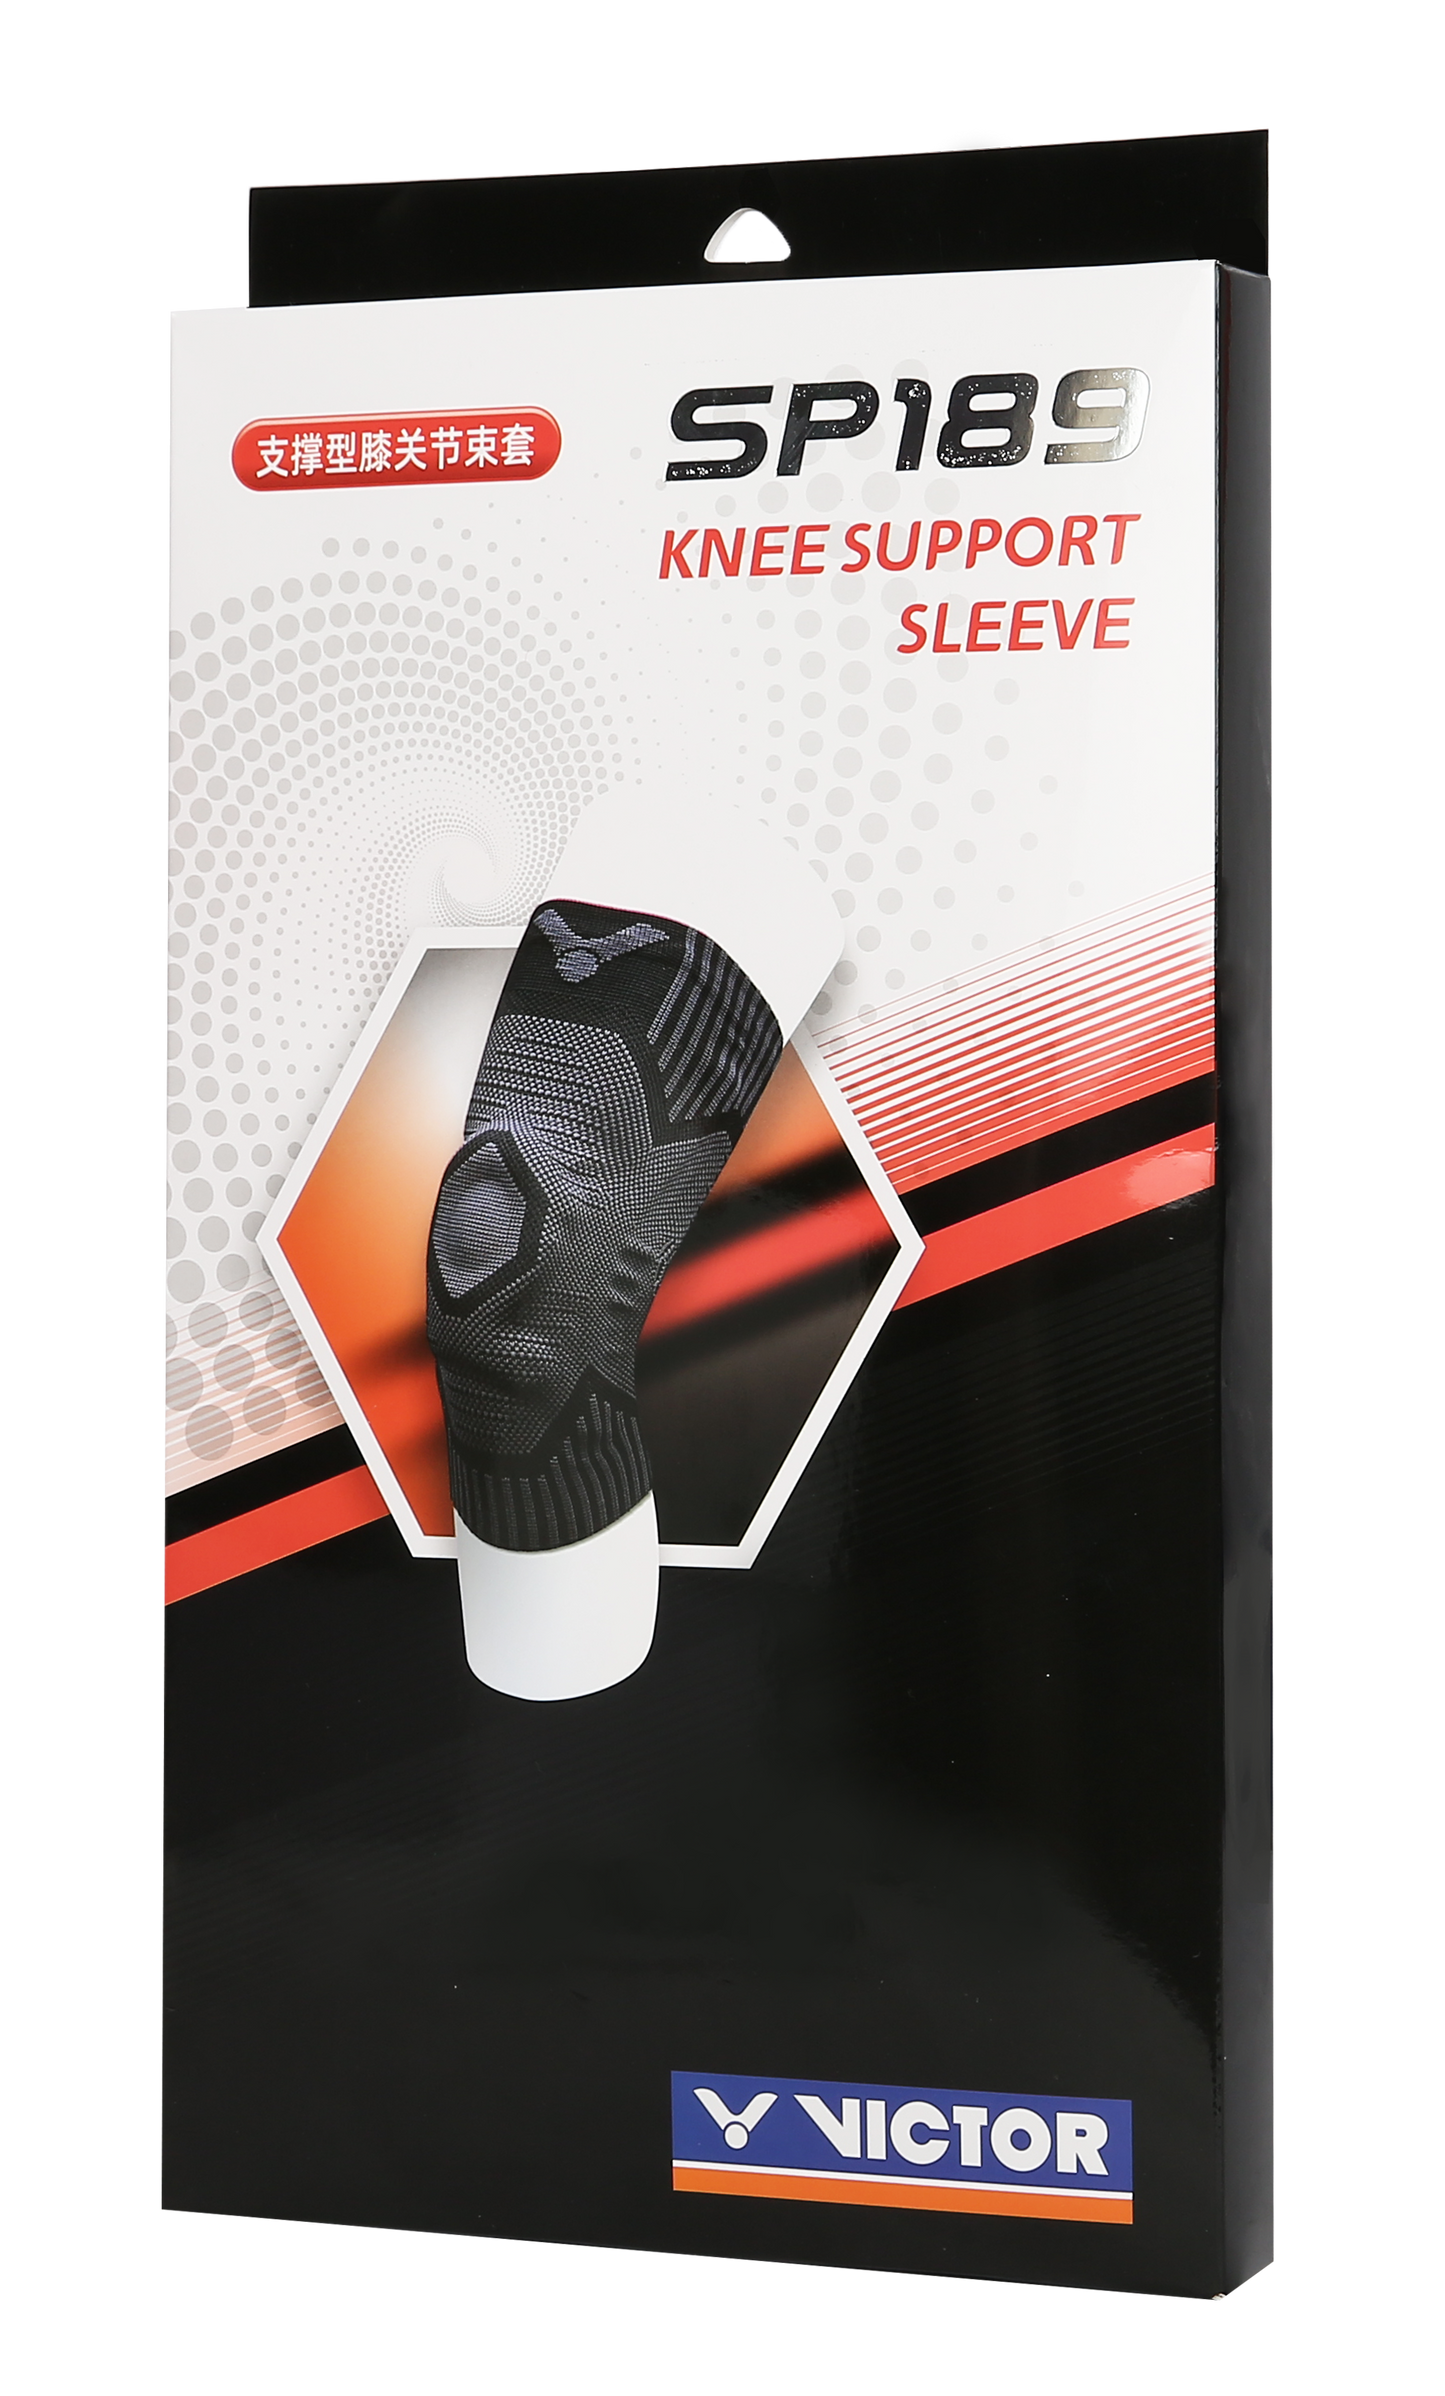 SP189 KNEE SUPPORT SLEEVE